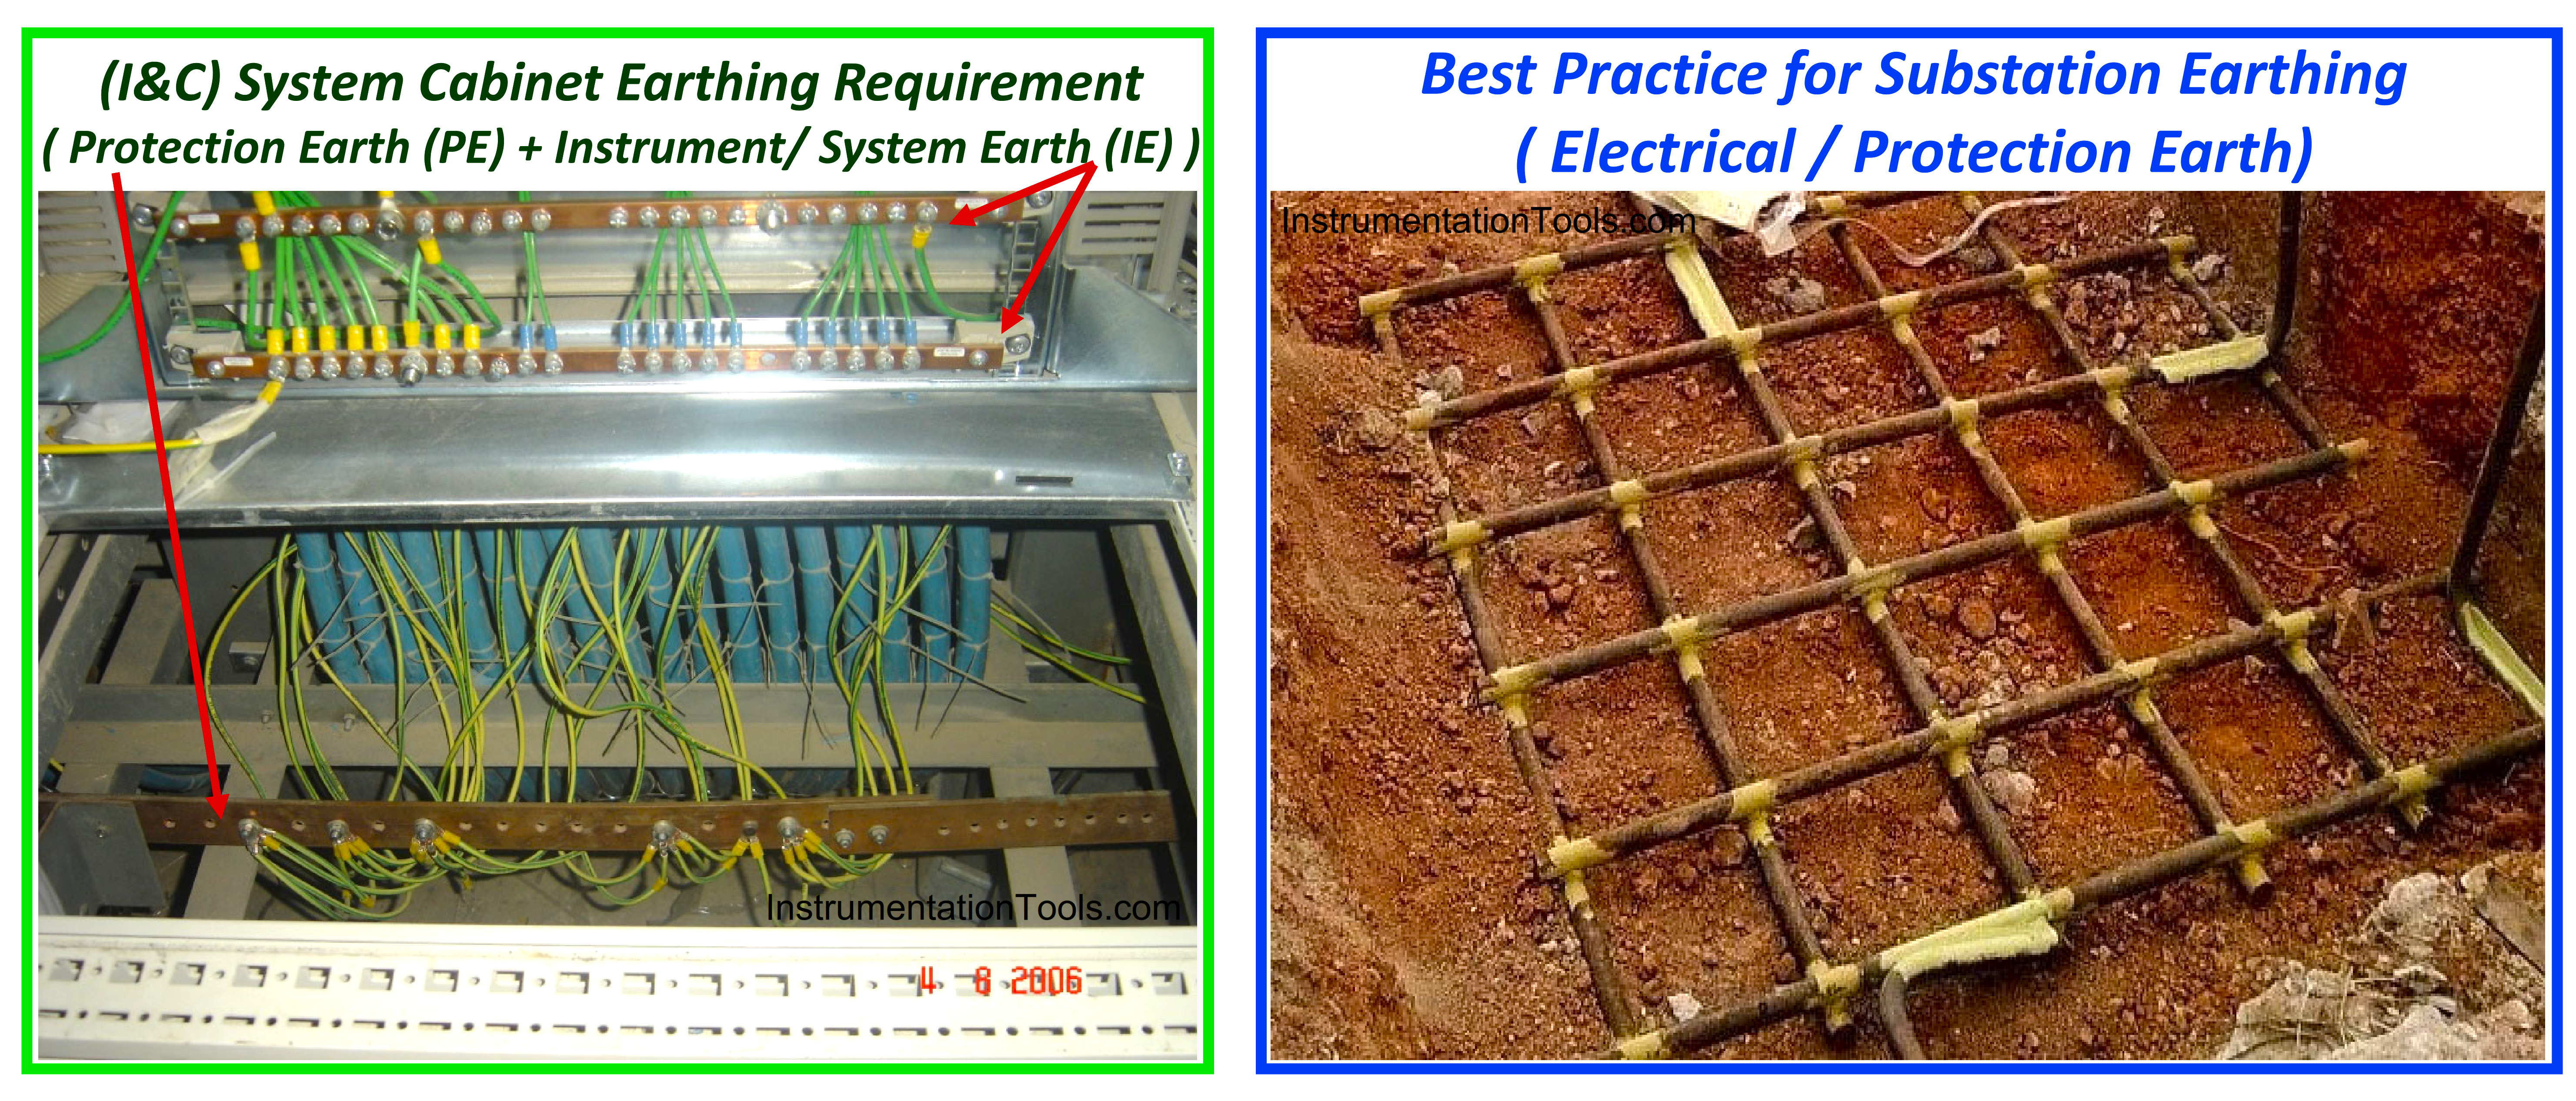 Best Practice for Substation Electrical Earthing